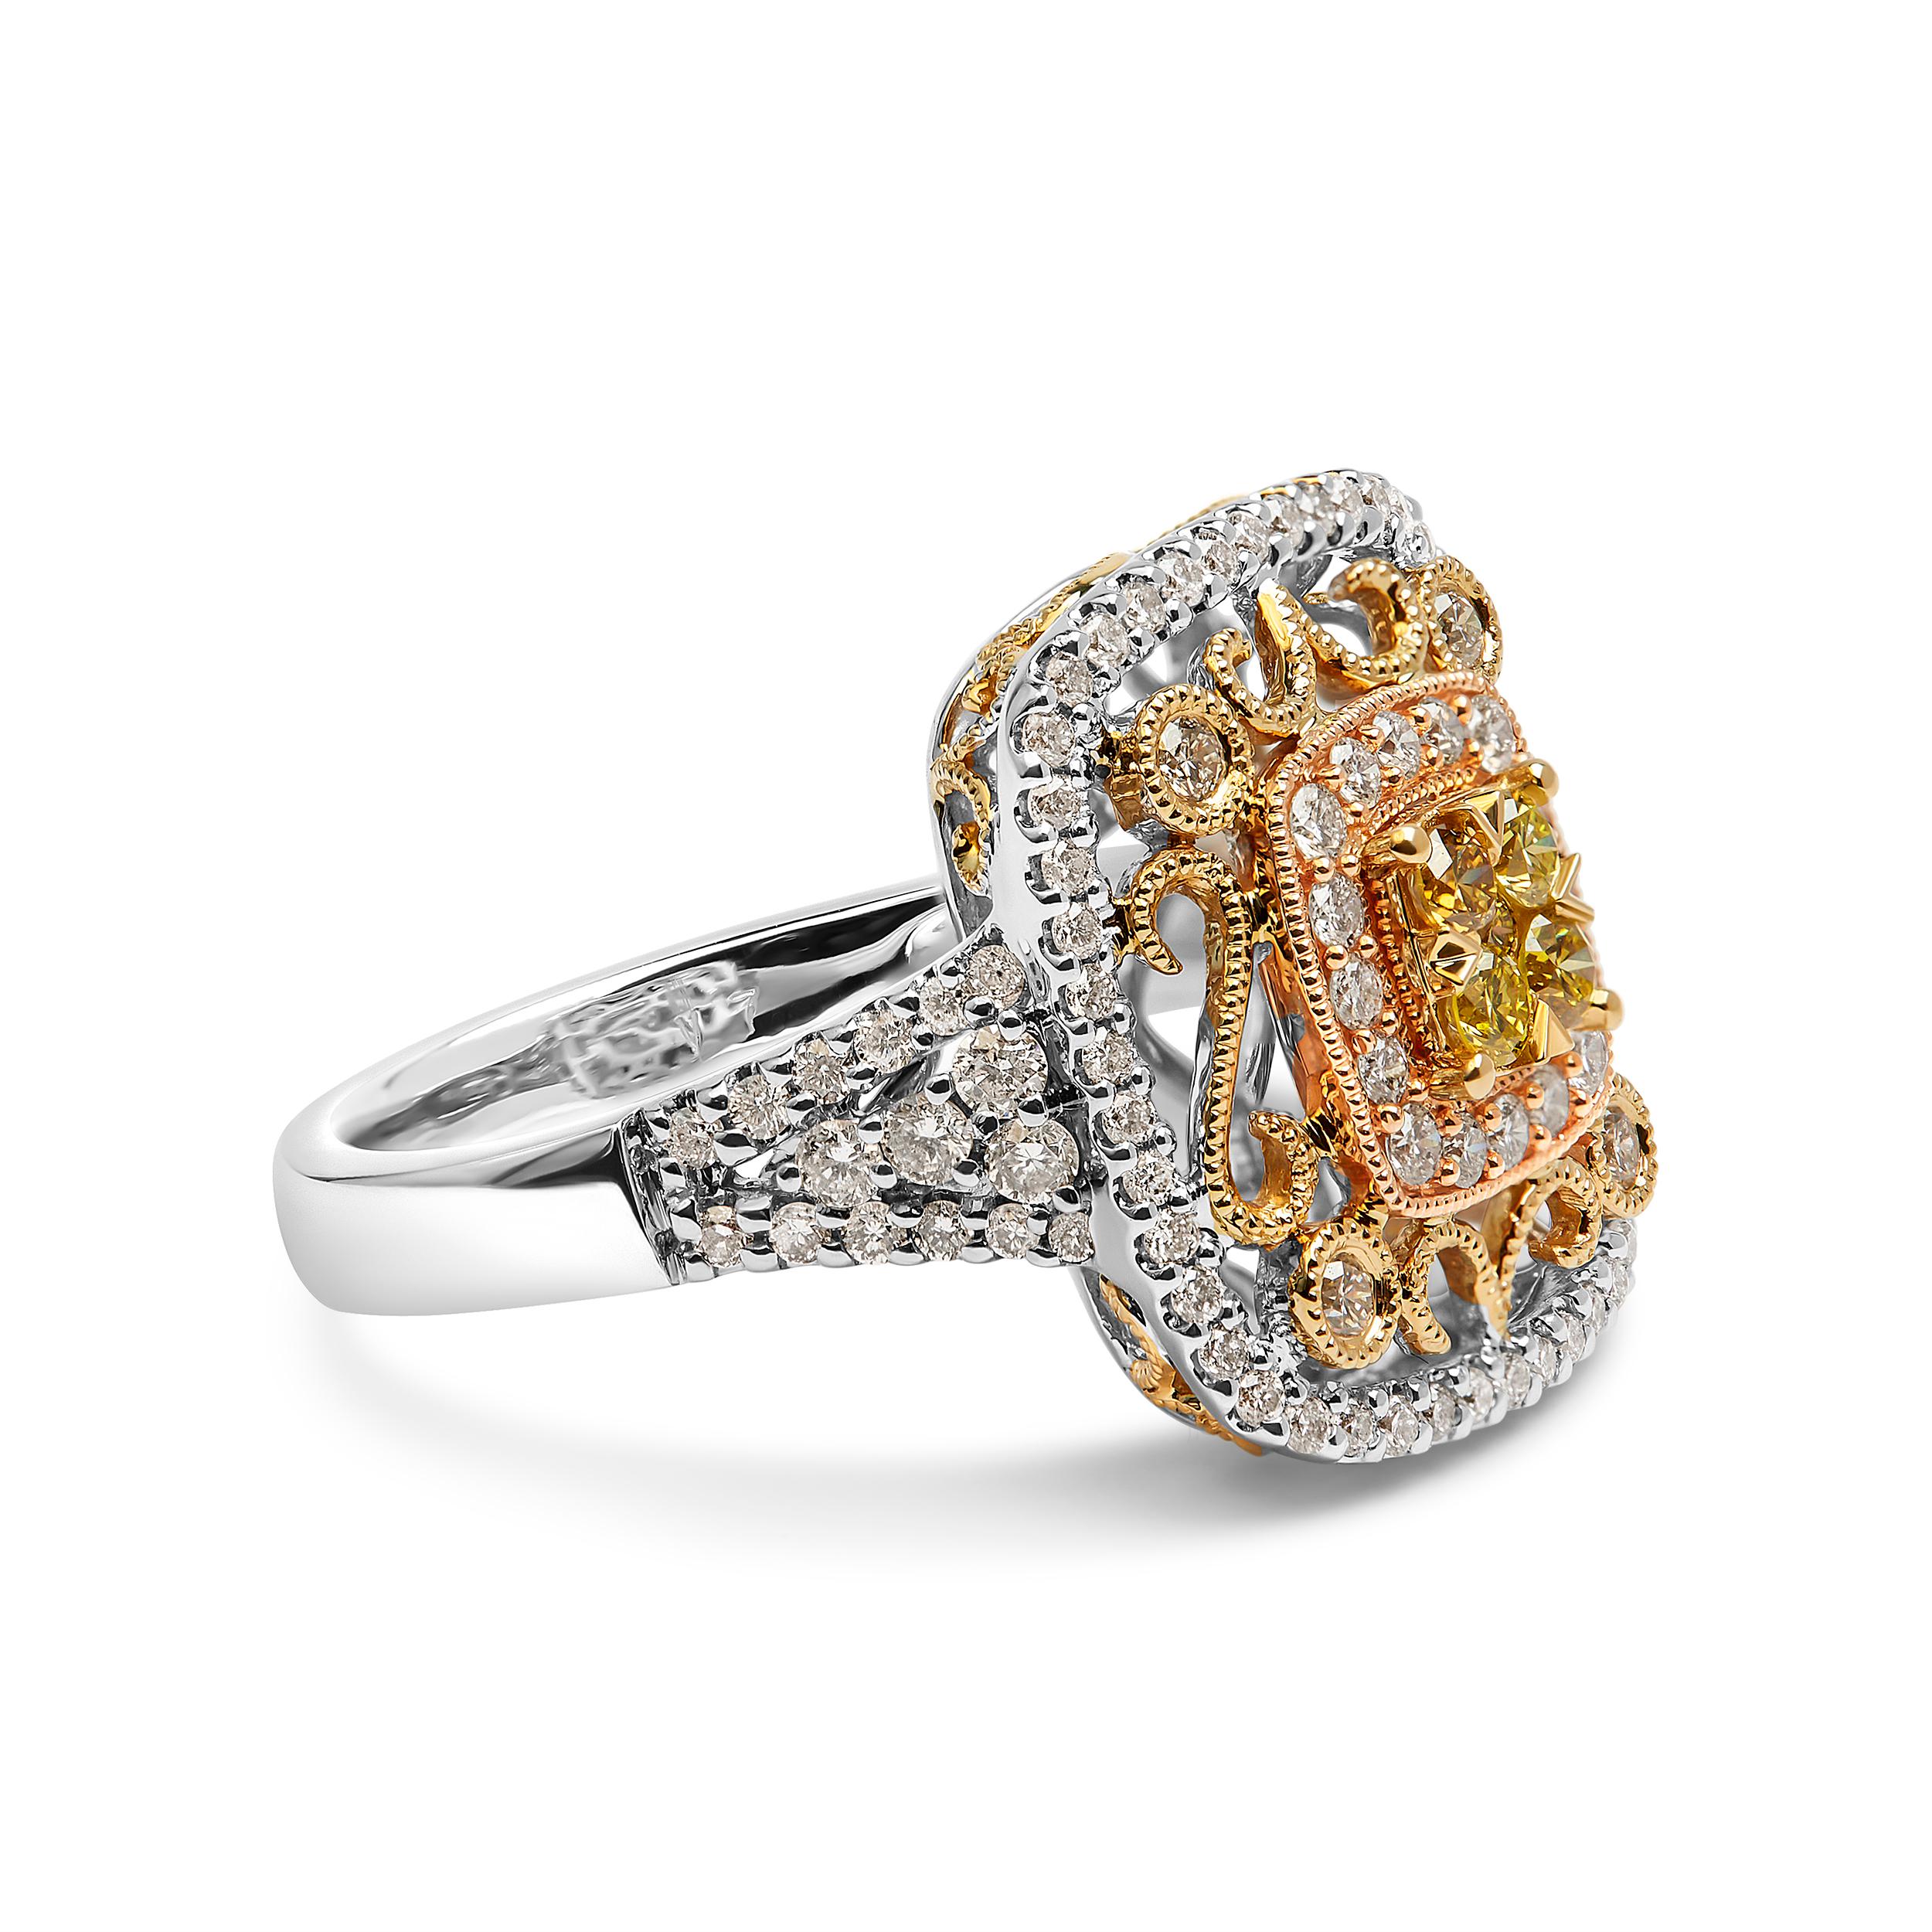 Introducing a dazzling masterpiece, this 14K Tri-Toned Gold Cocktail Cluster Ring is a breathtaking piece that will leave you spellbound. Crafted with love from 14K yellow, white, and rose gold, this ring showcases a mesmerizing arrangement of 103